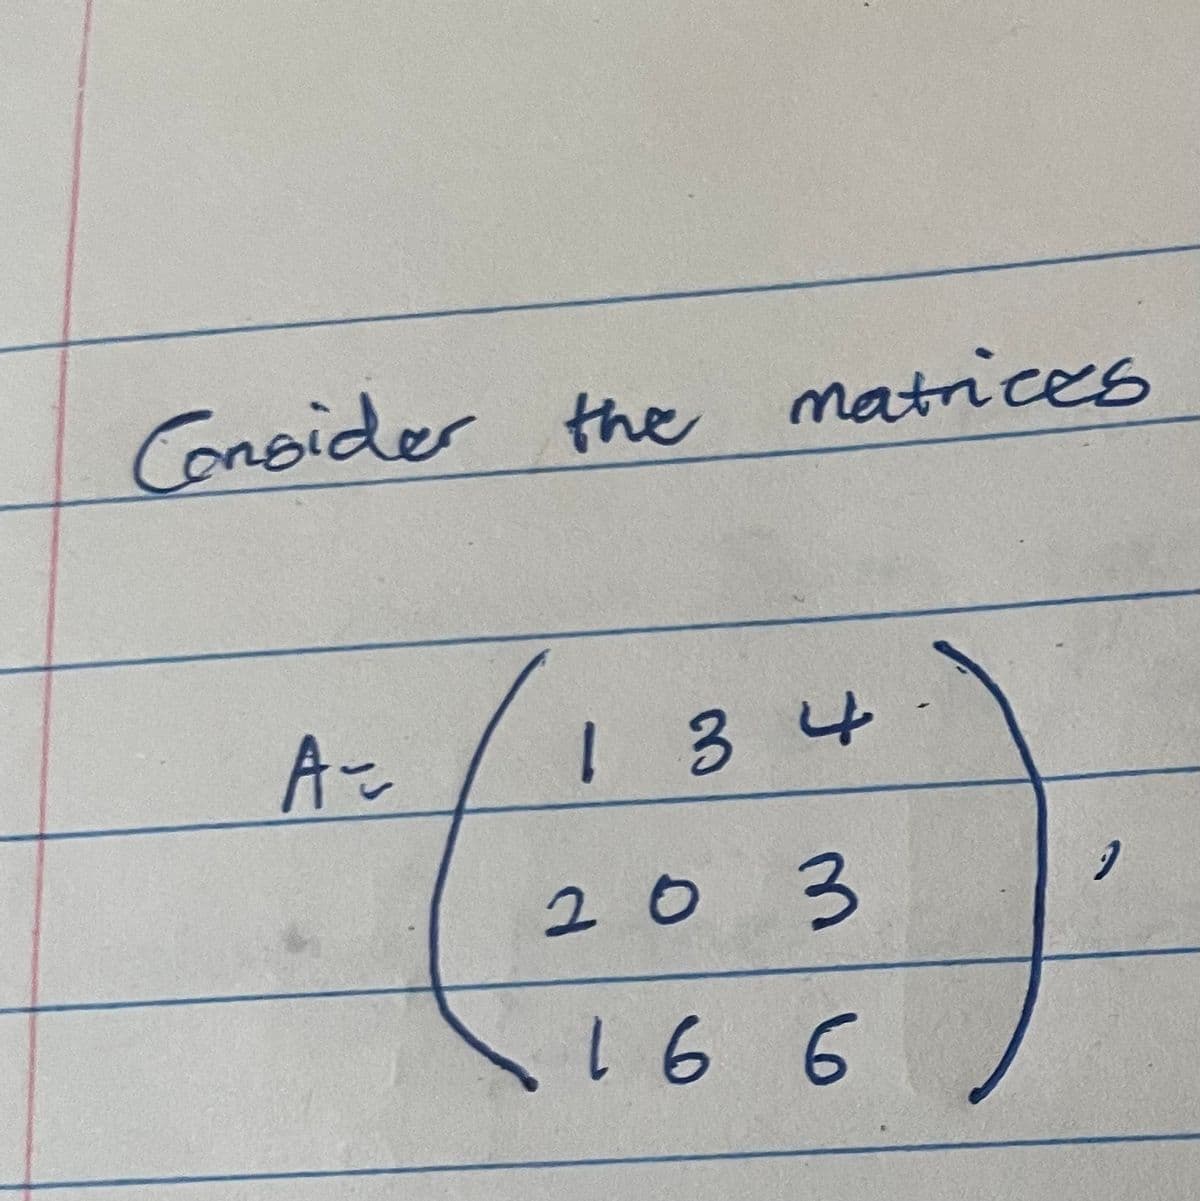 Consider the matrices
A-
134
203
16 6
